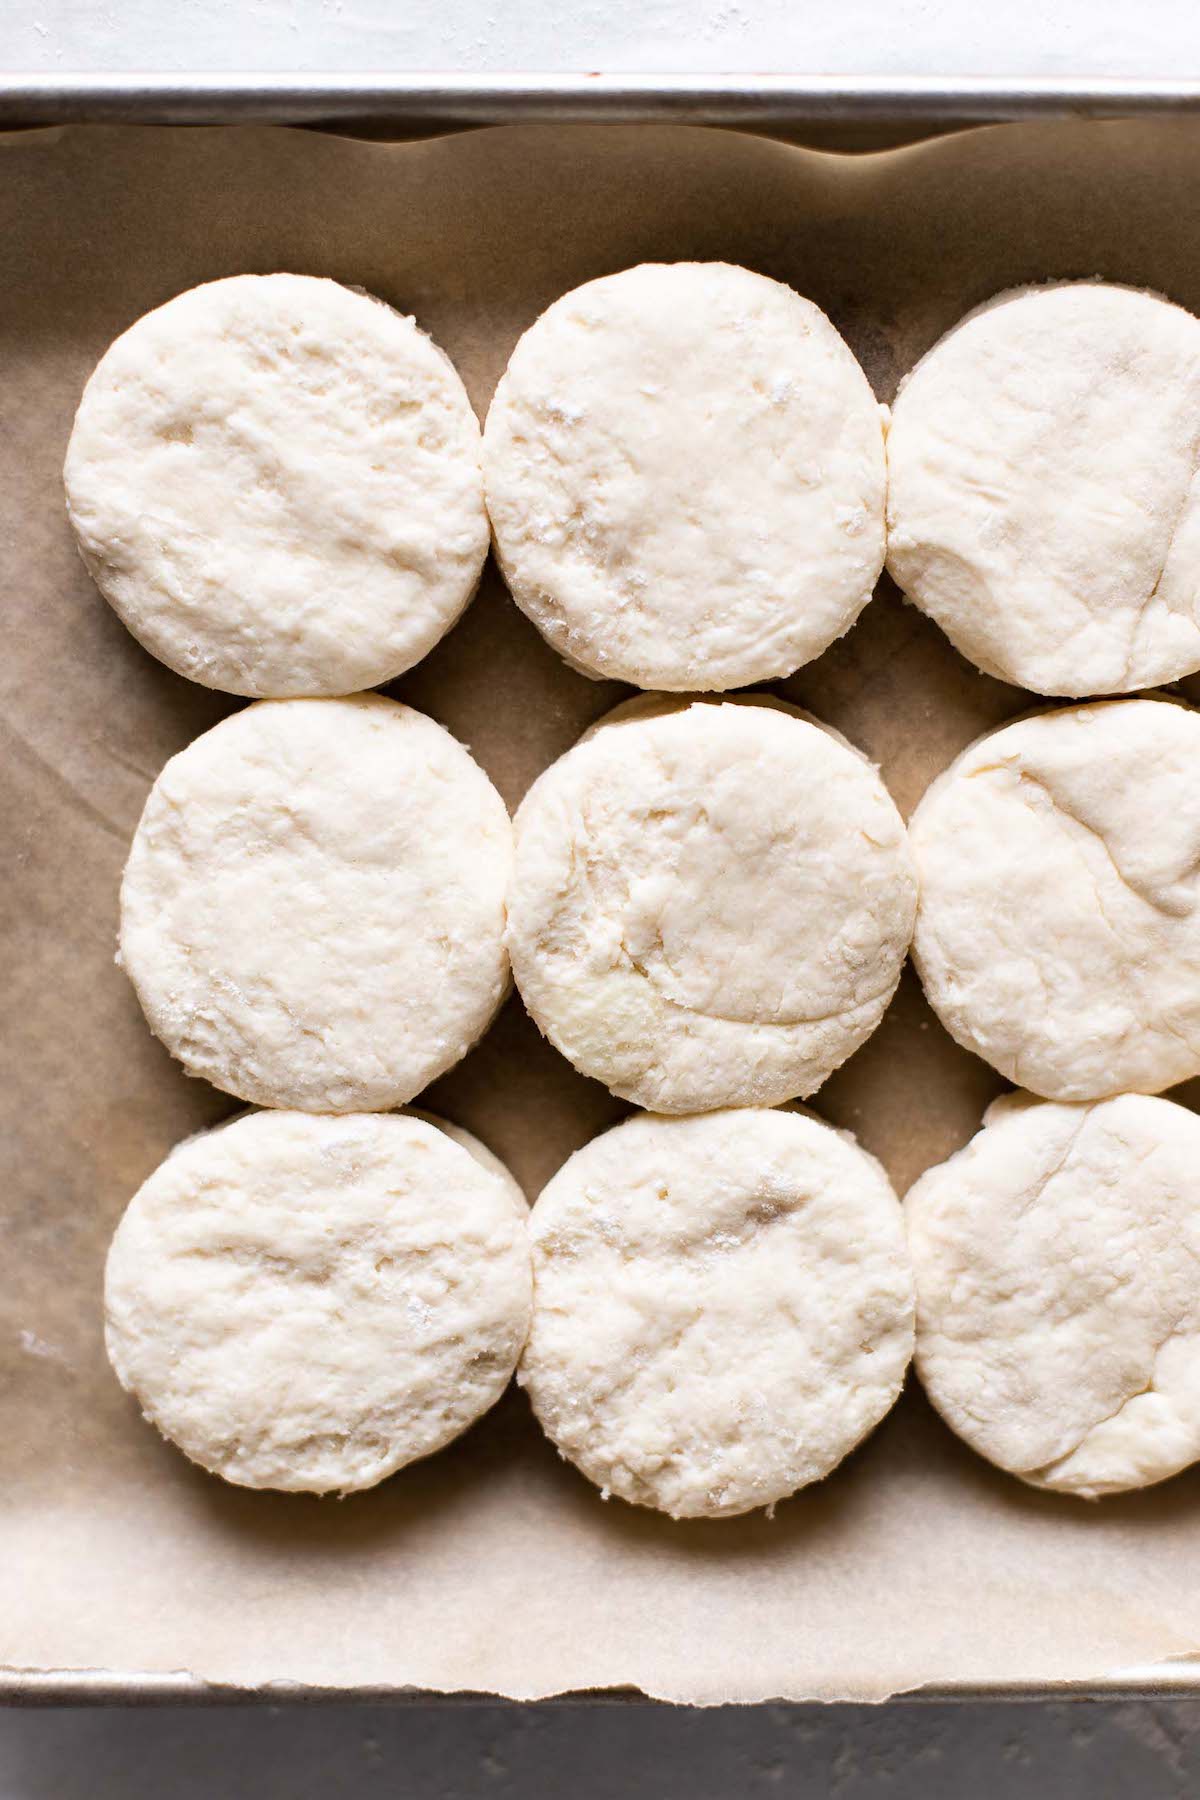 Overhead view of nine raw biscuits on parchment paper.